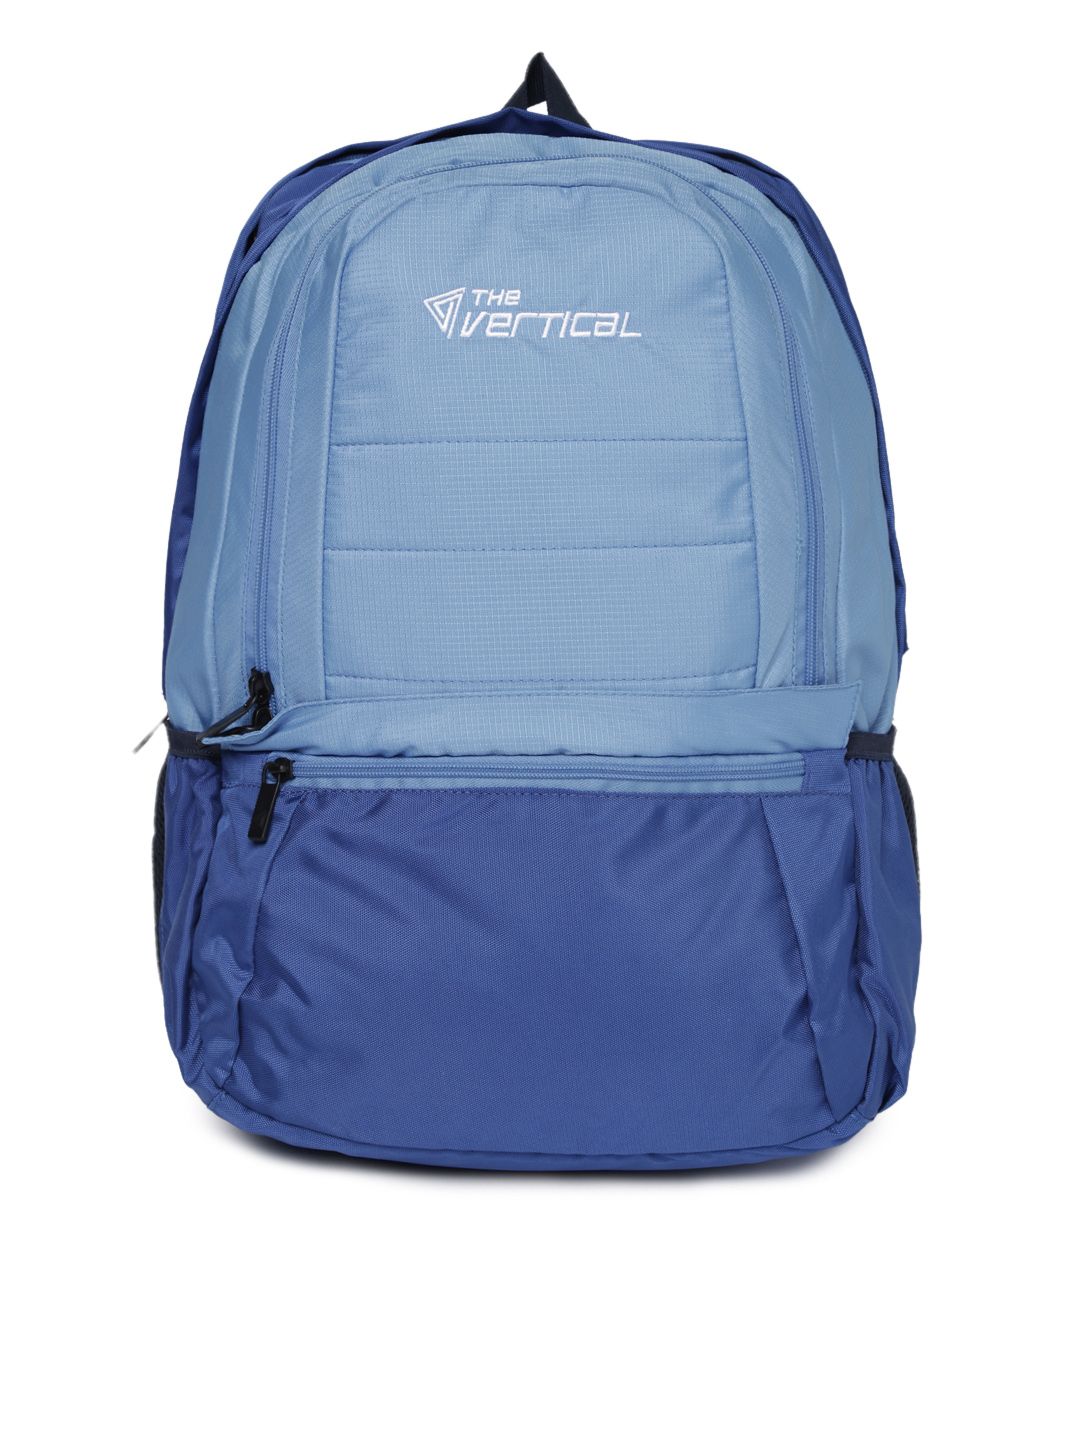 THe VerTicaL Unisex Blue Laptop Backpack Price in India